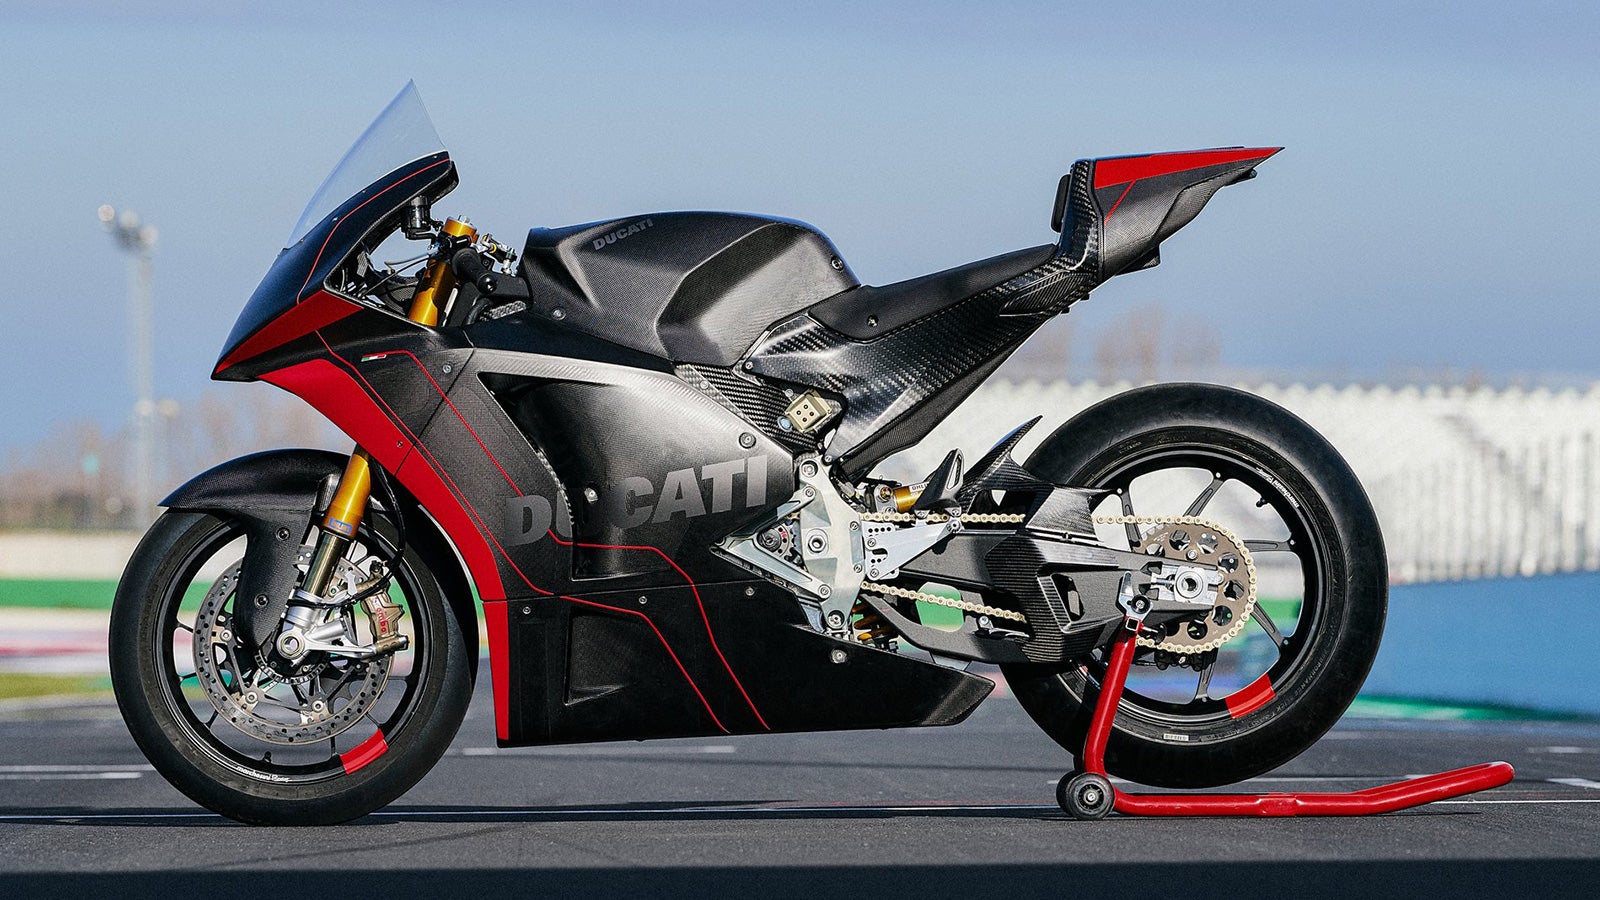  Ducati  confirms its upcoming racing electric motorcycle  to 